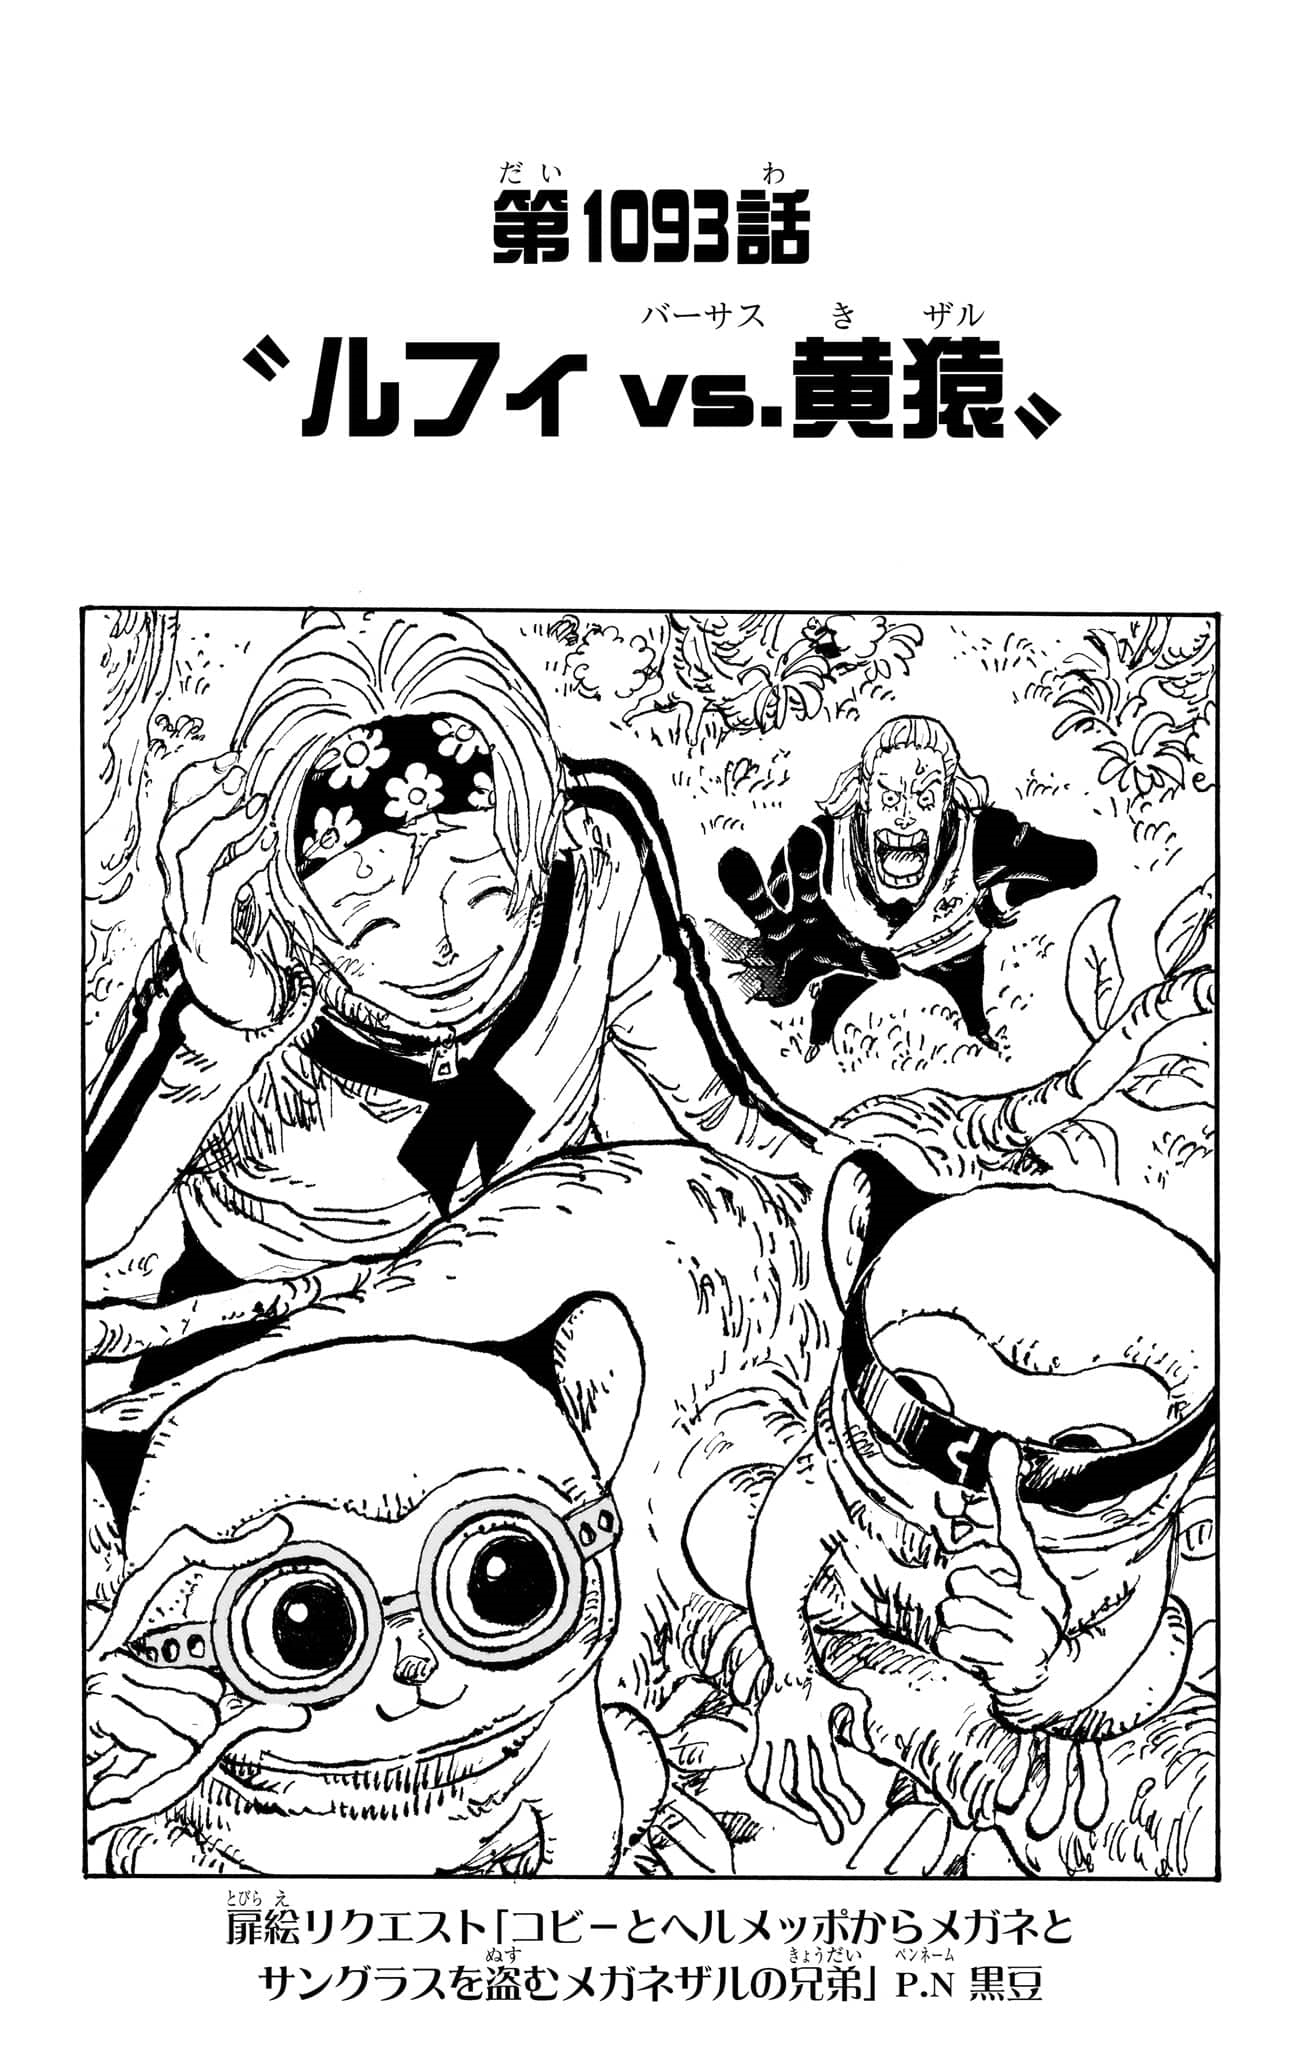 Chapter 106, One Piece Wiki